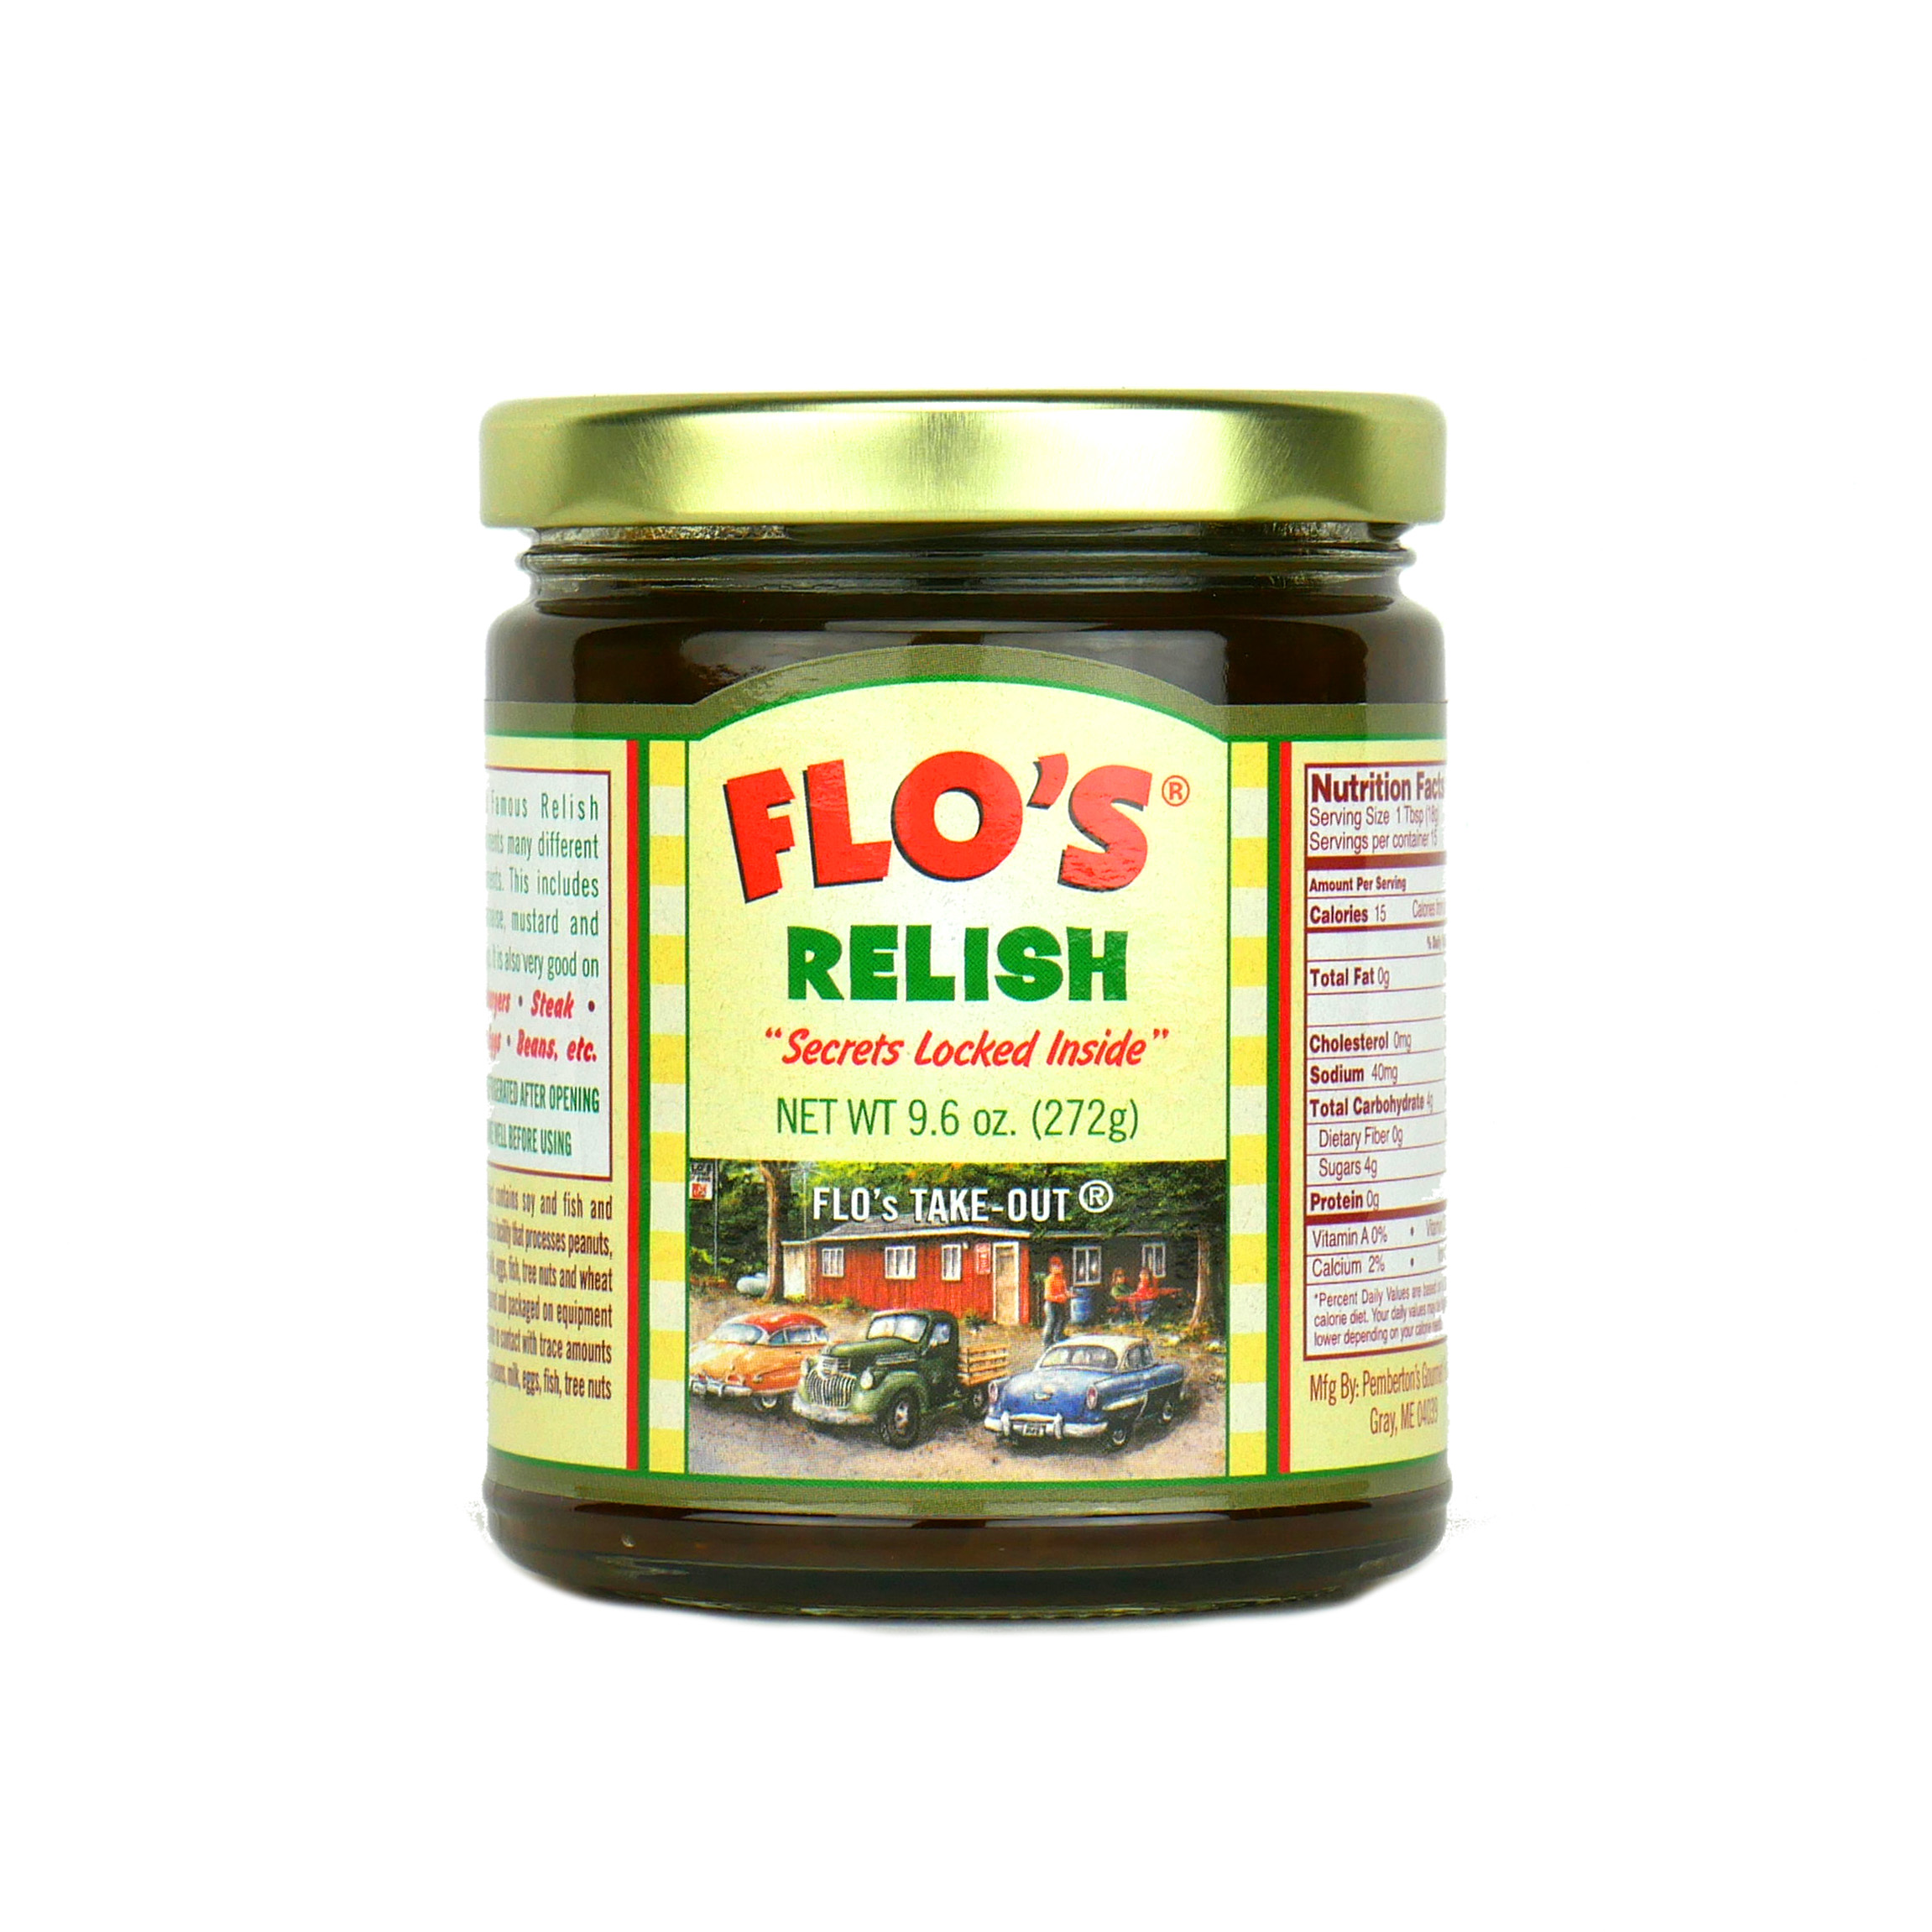 What Is Relish, Other Than a Hot Dog's Best Condiment?